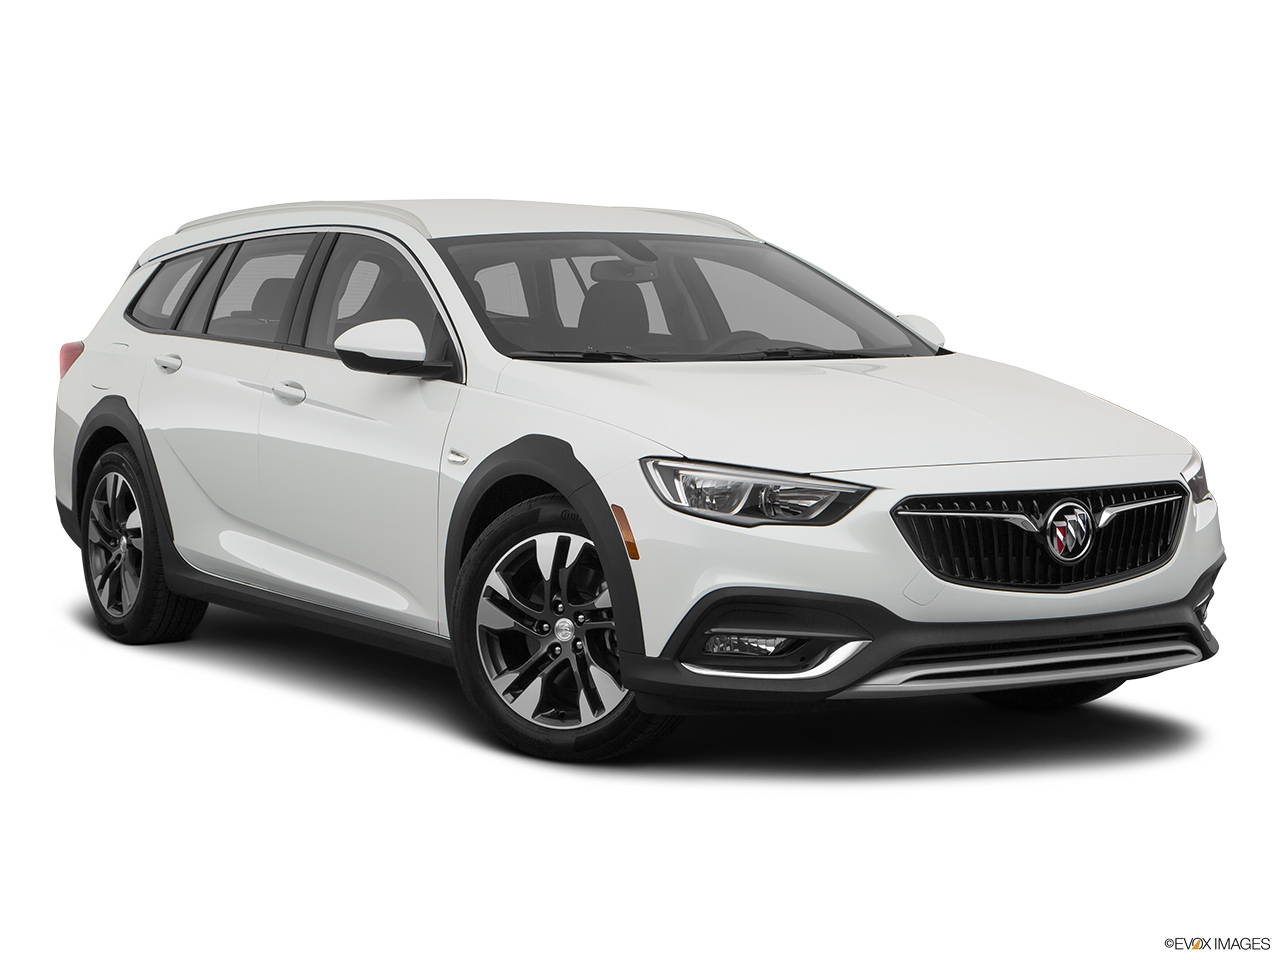 2018 Buick Regal Tourx  Preferred Front passenger 3/4 w/ wheels turned. 